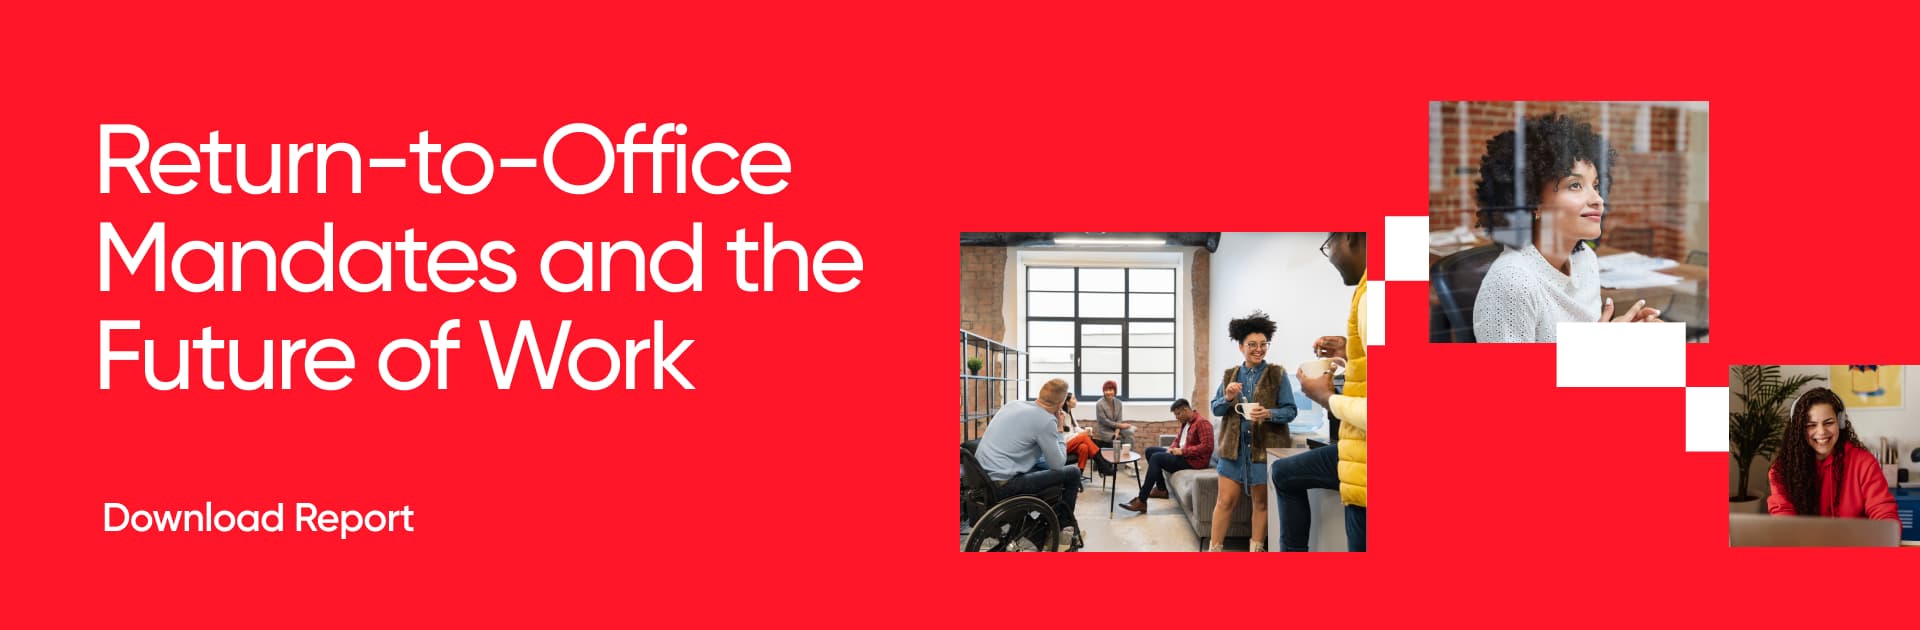 Return to office mandates and the future of work